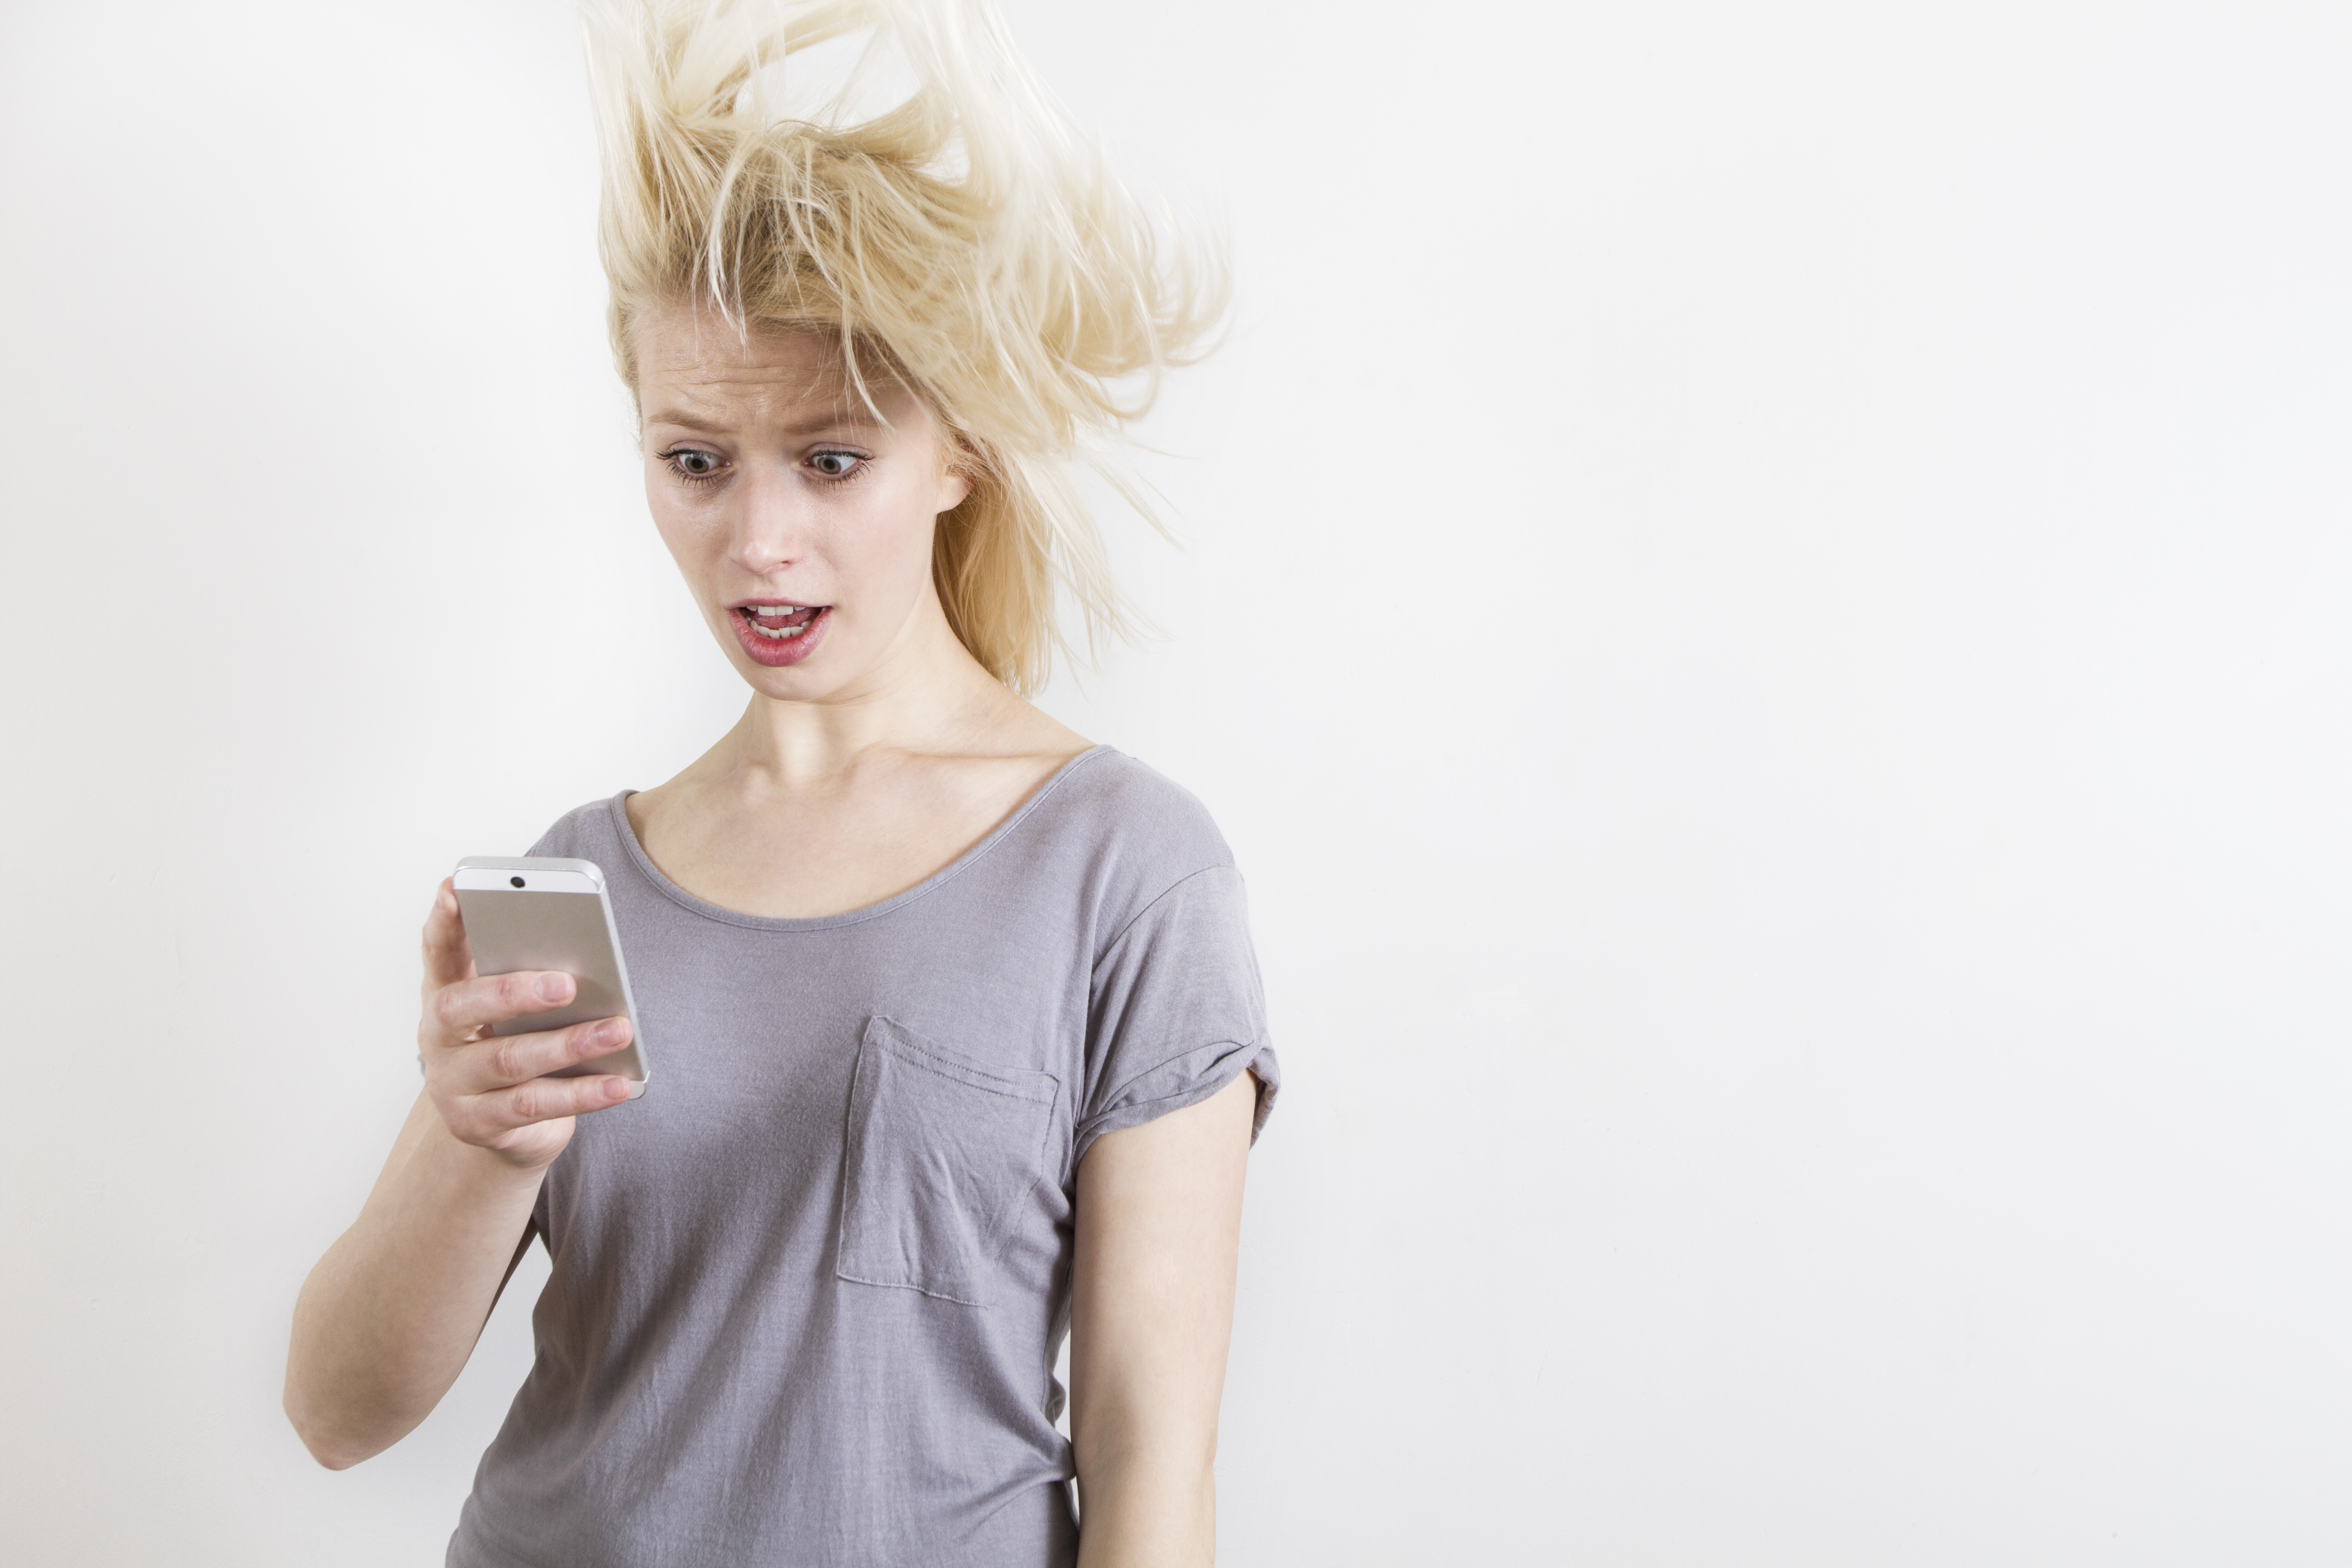 Woman with shocked expression looking at phone | Source: Getty Images